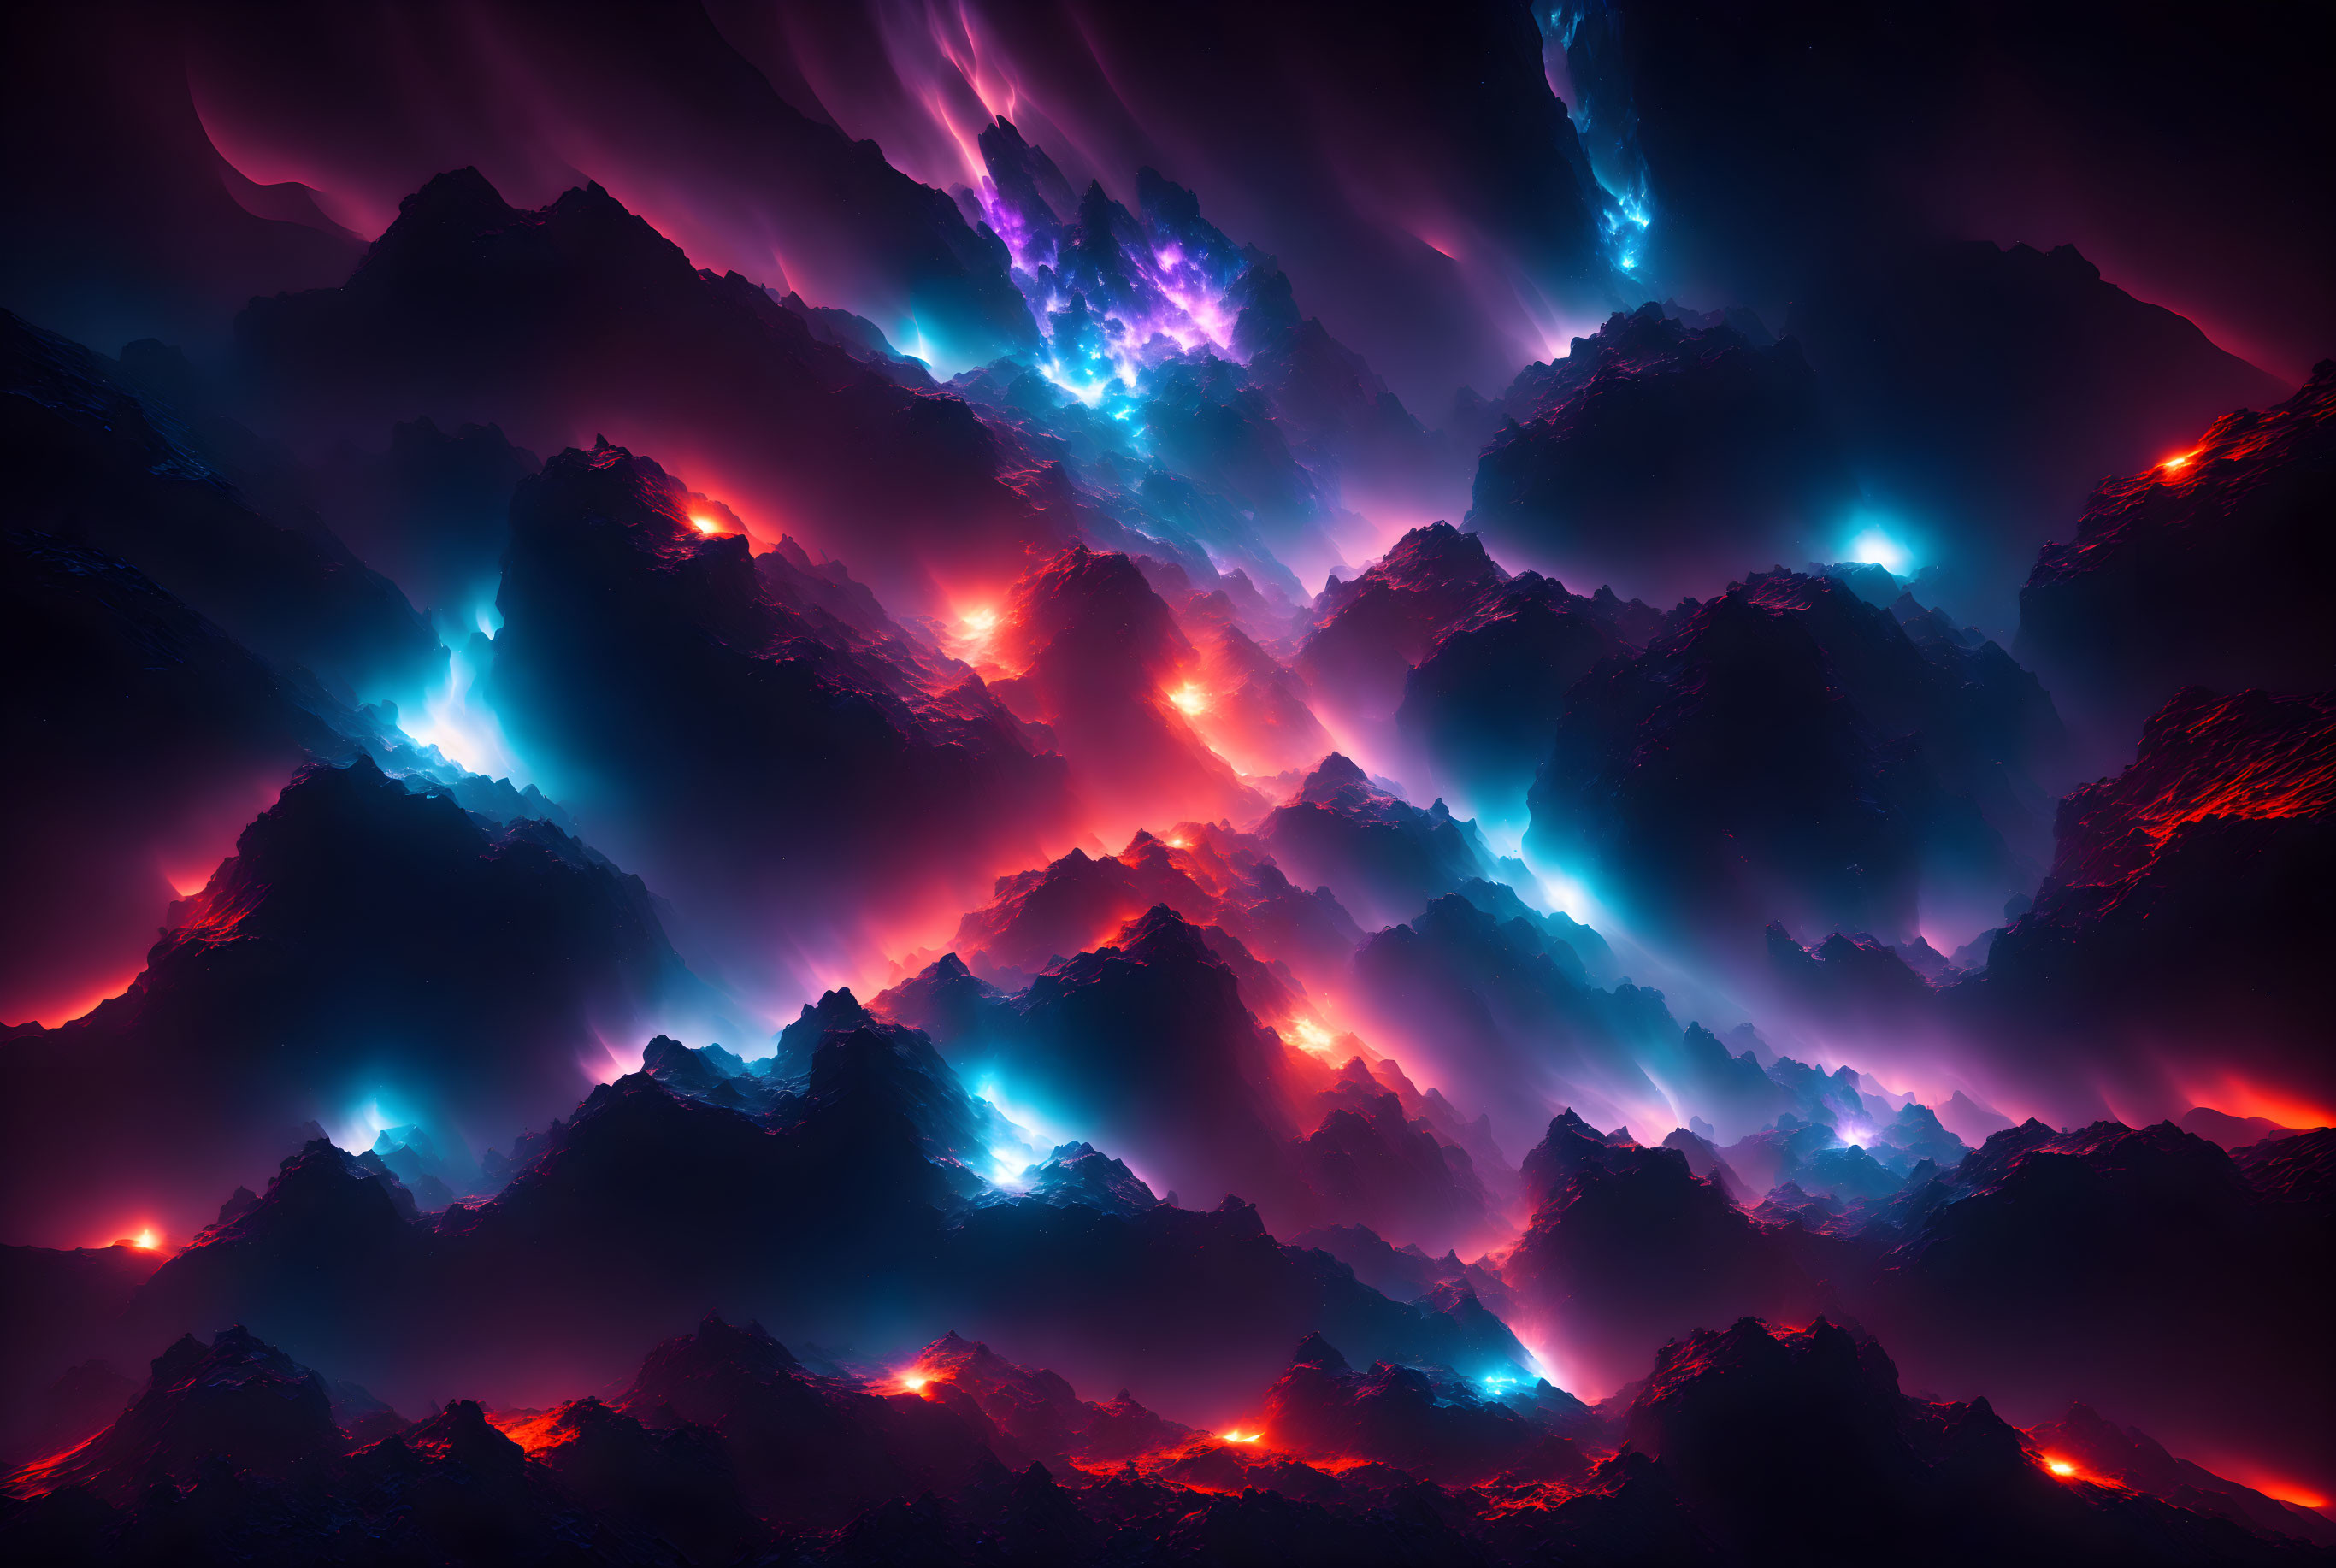 Digitally Created Alien Landscape with Jagged Mountains and Blue-Red Lighting